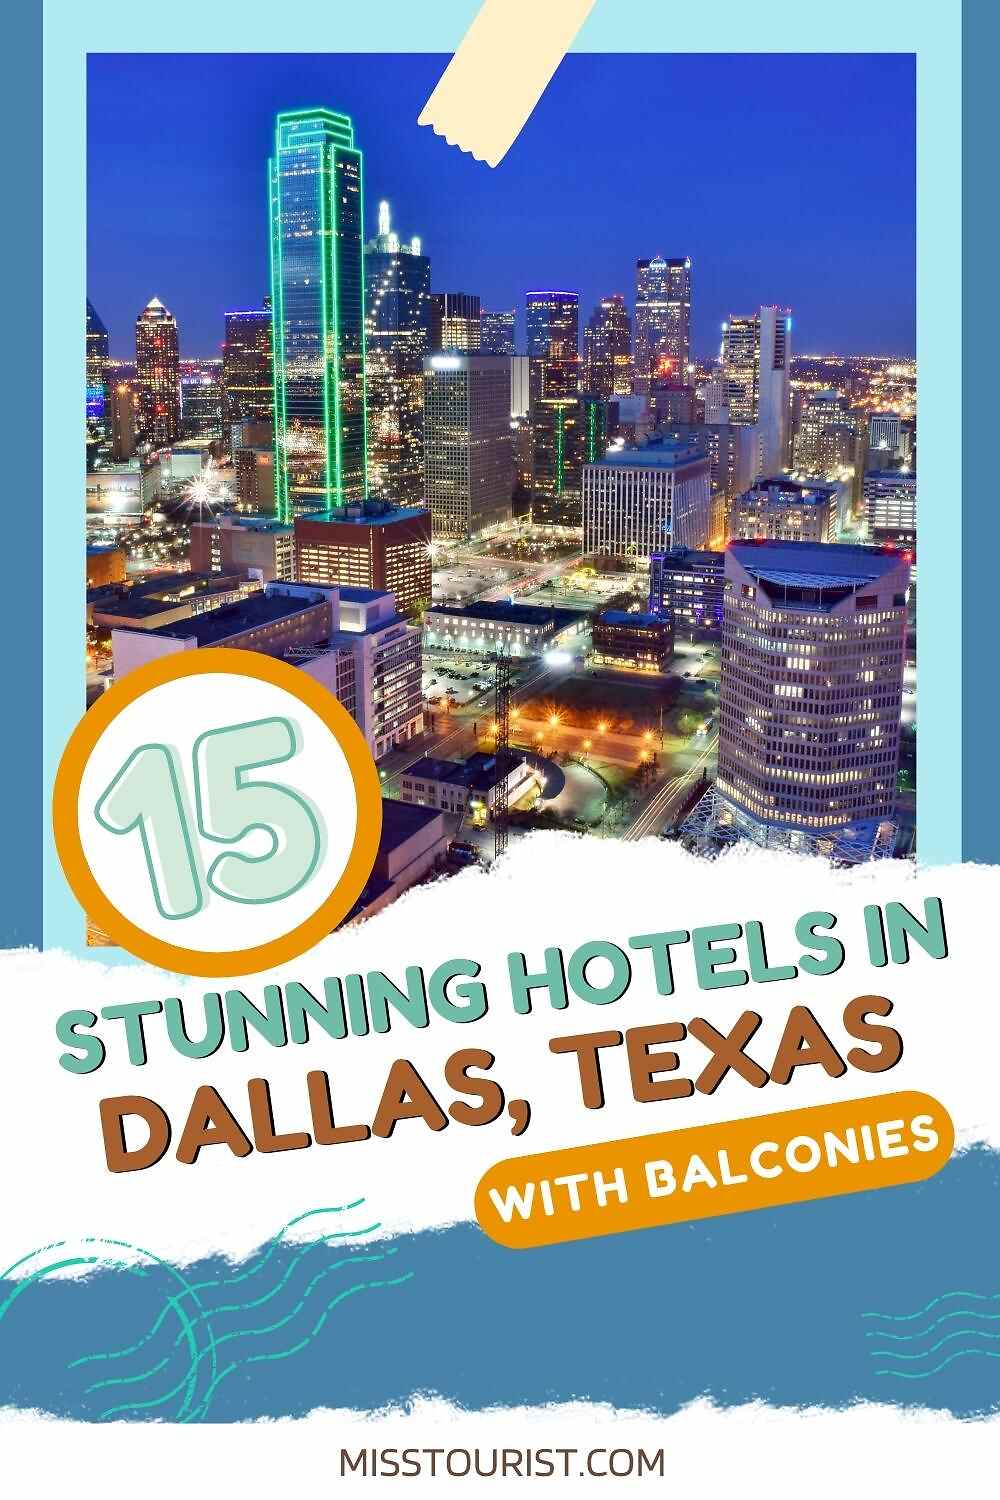 Hotels With Balconies In Dallas PIN 2 